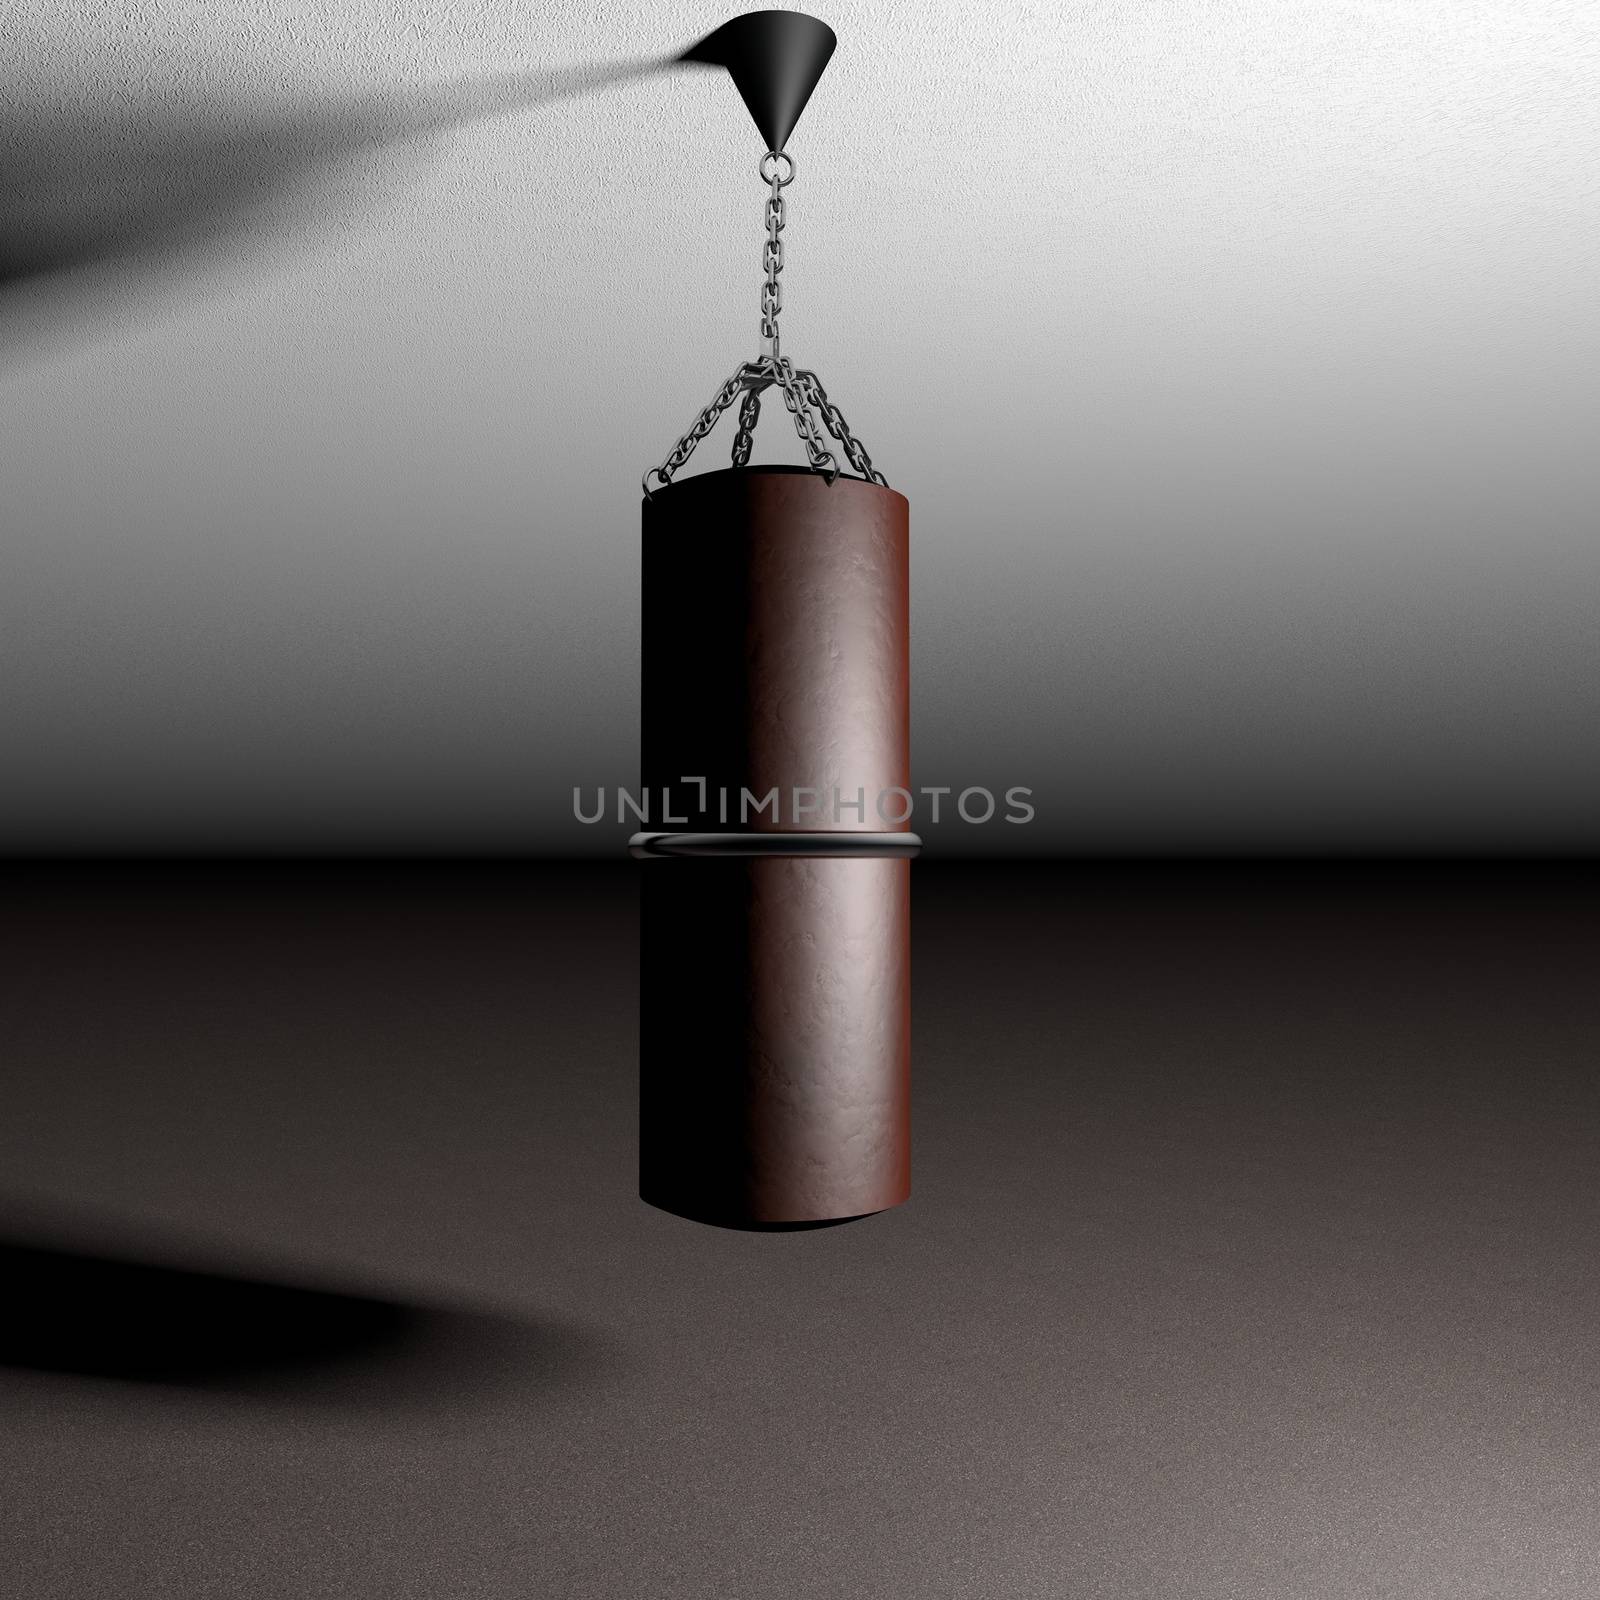 Boxing bag by Koufax73